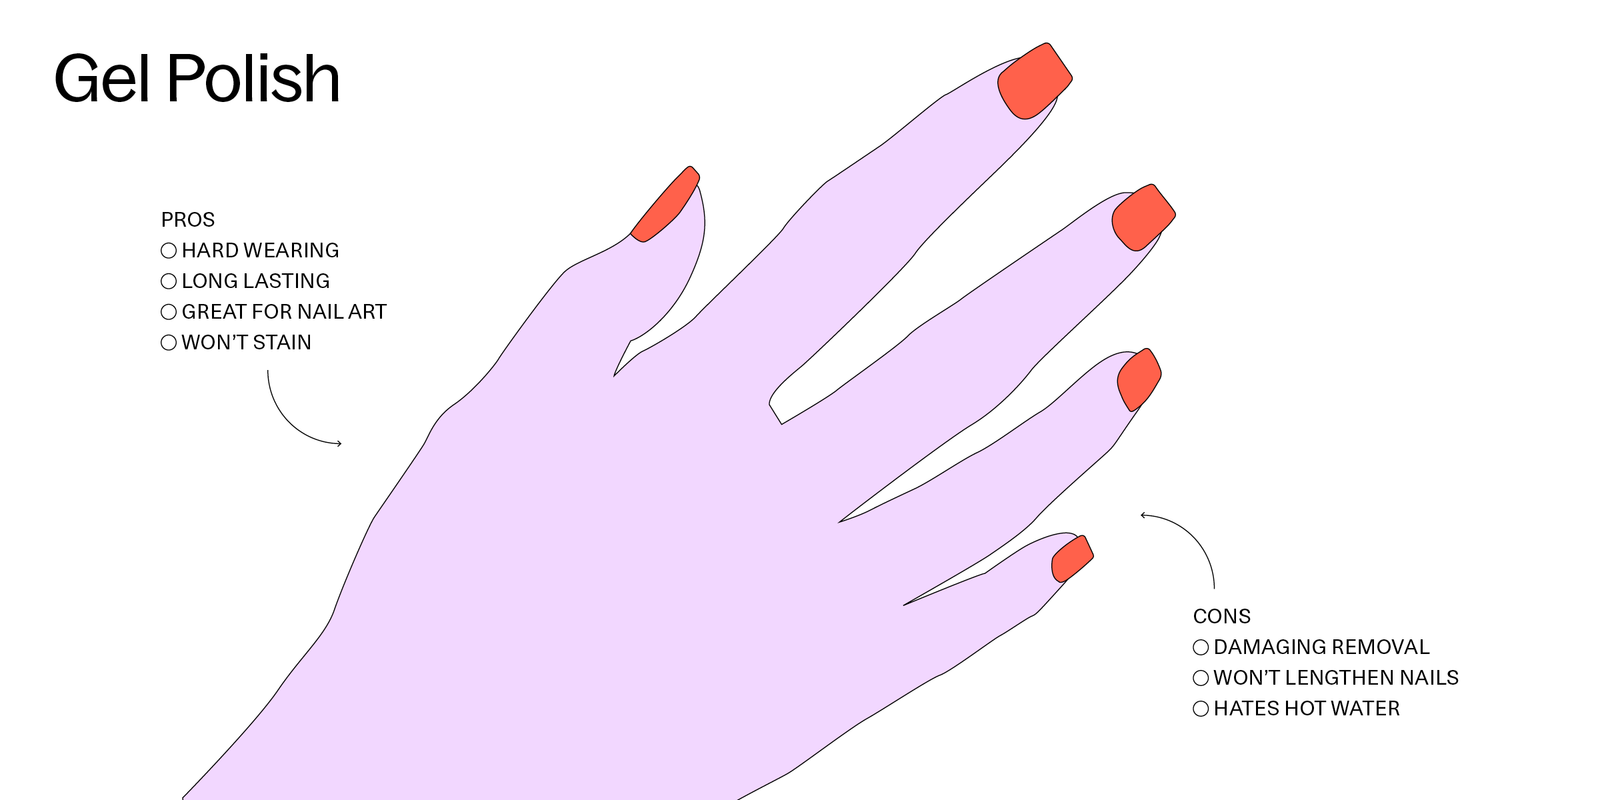 What does S and S mean for nails? - Quora